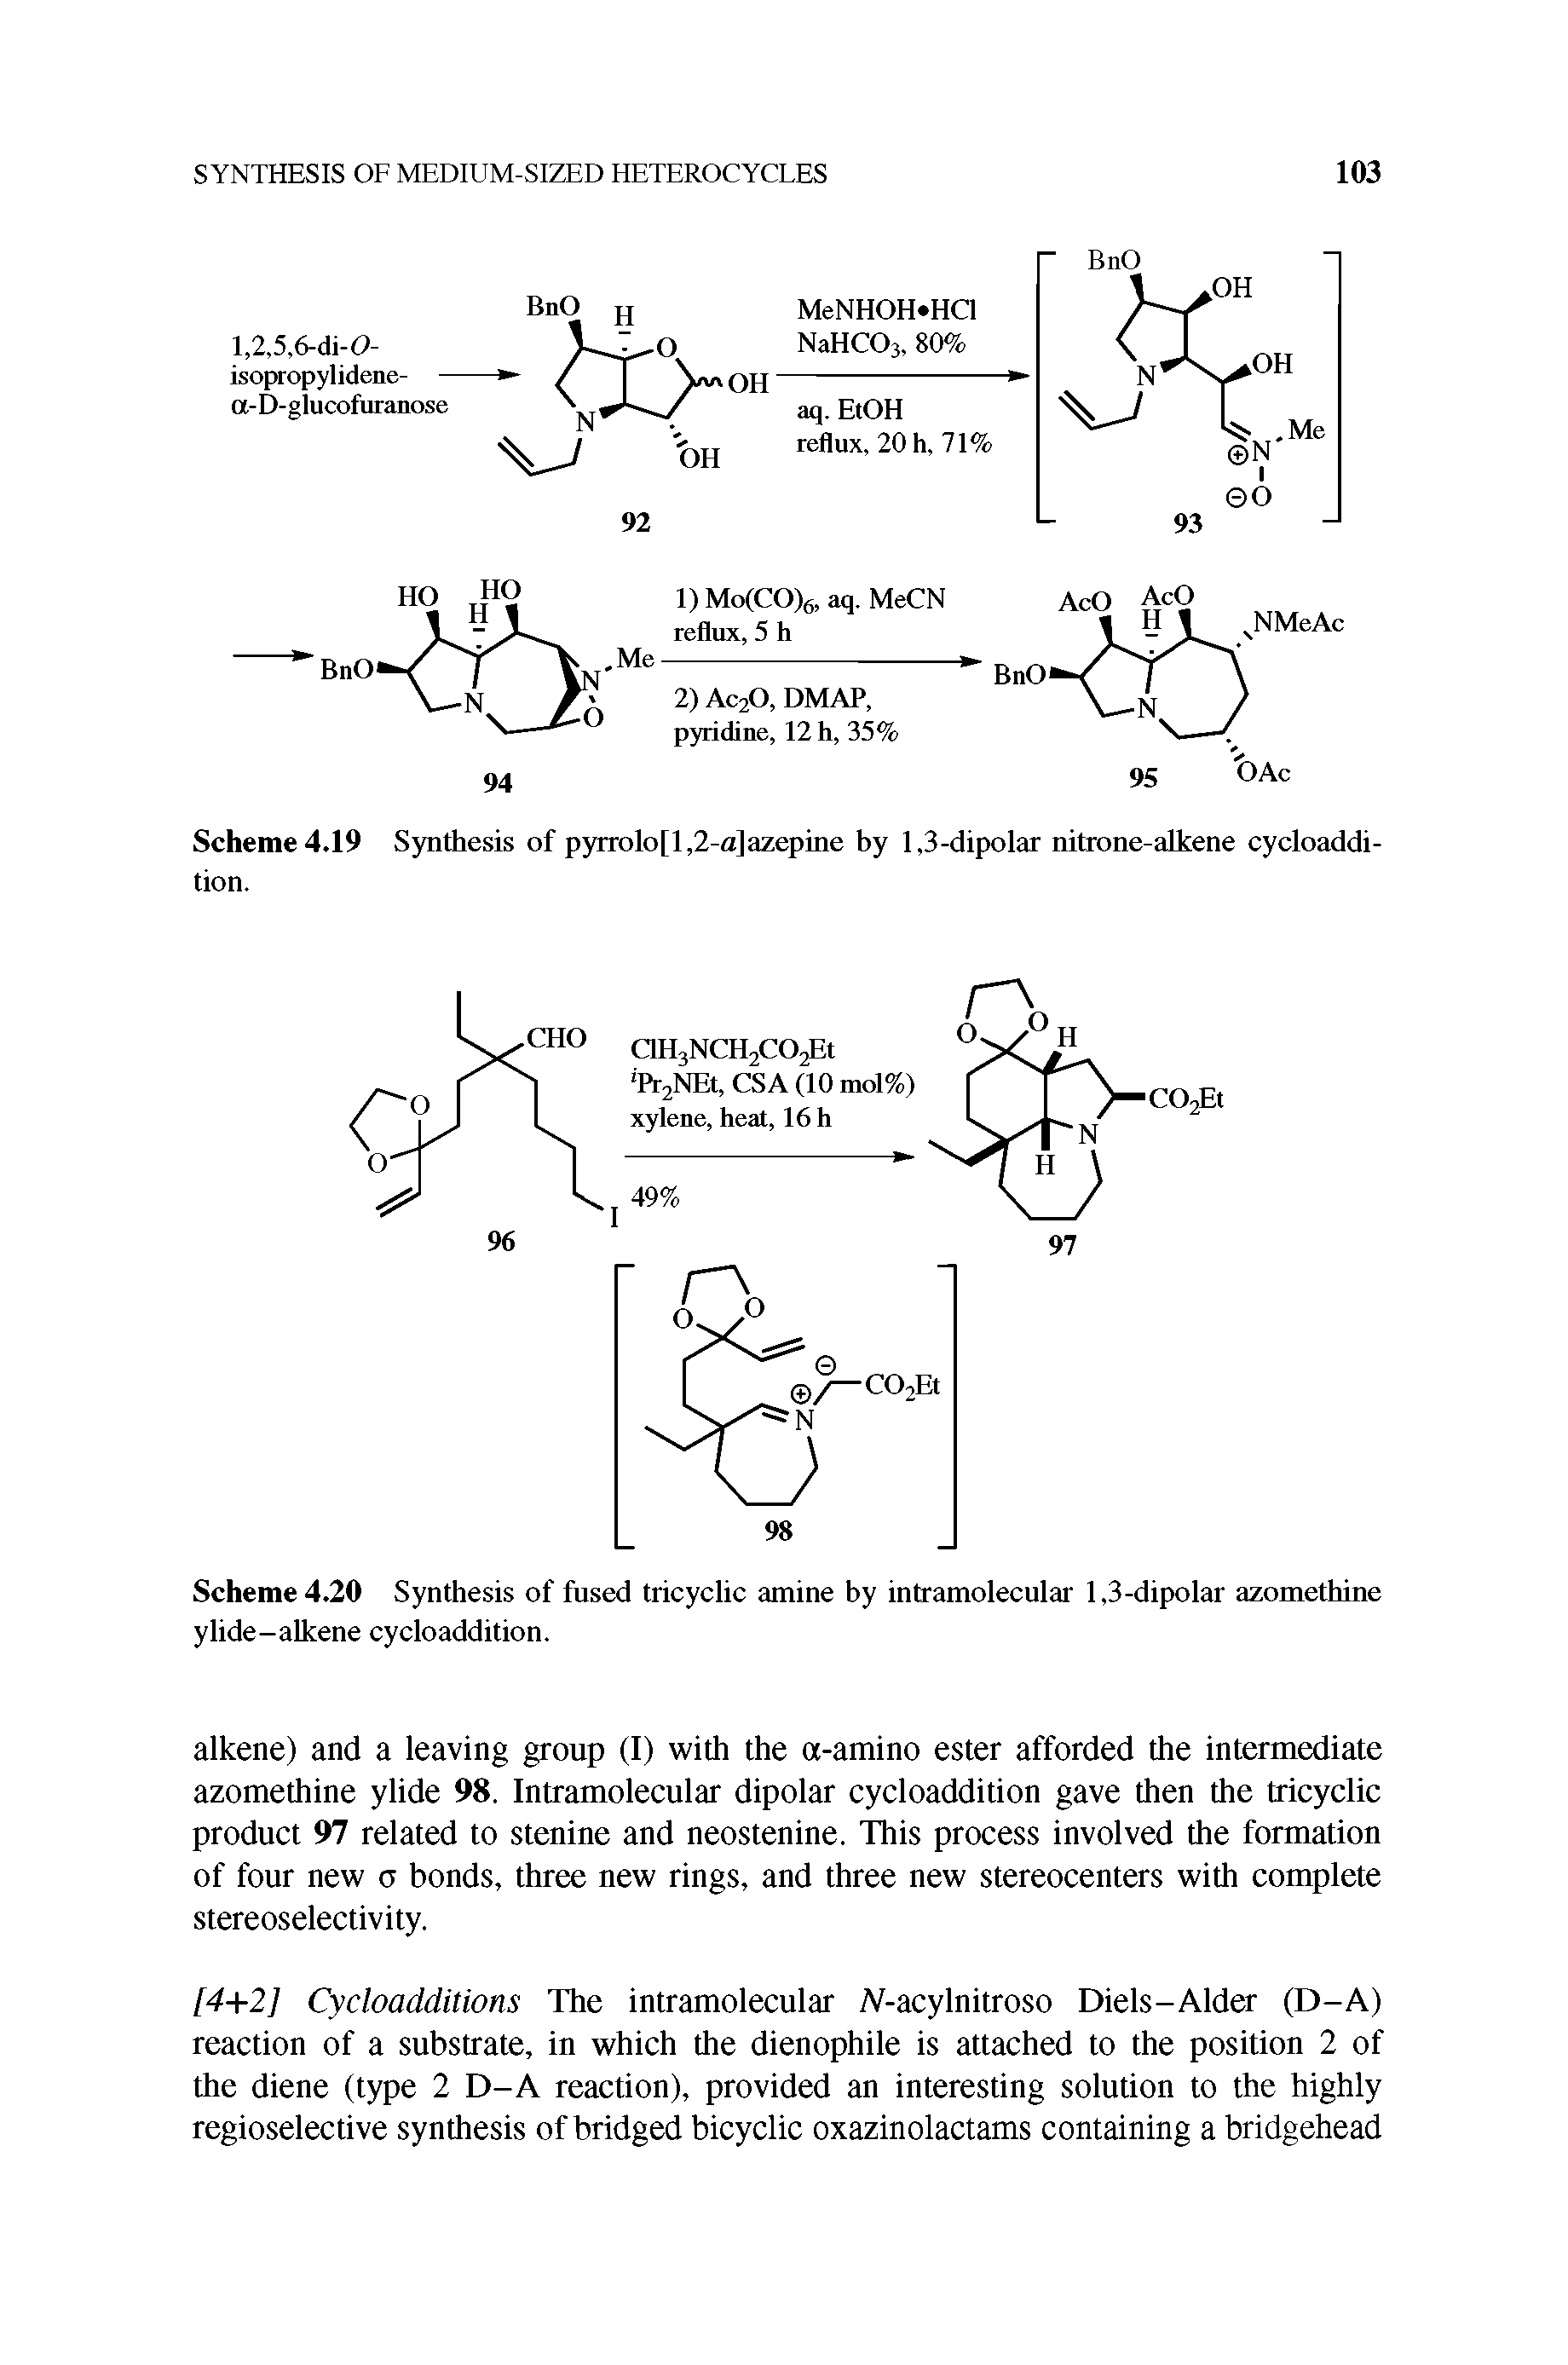 Scheme 4.20 Synthesis of fused tricyclic amine by intramolecular 1,3-dipolar azomethine ylide-alkene cycloaddition.